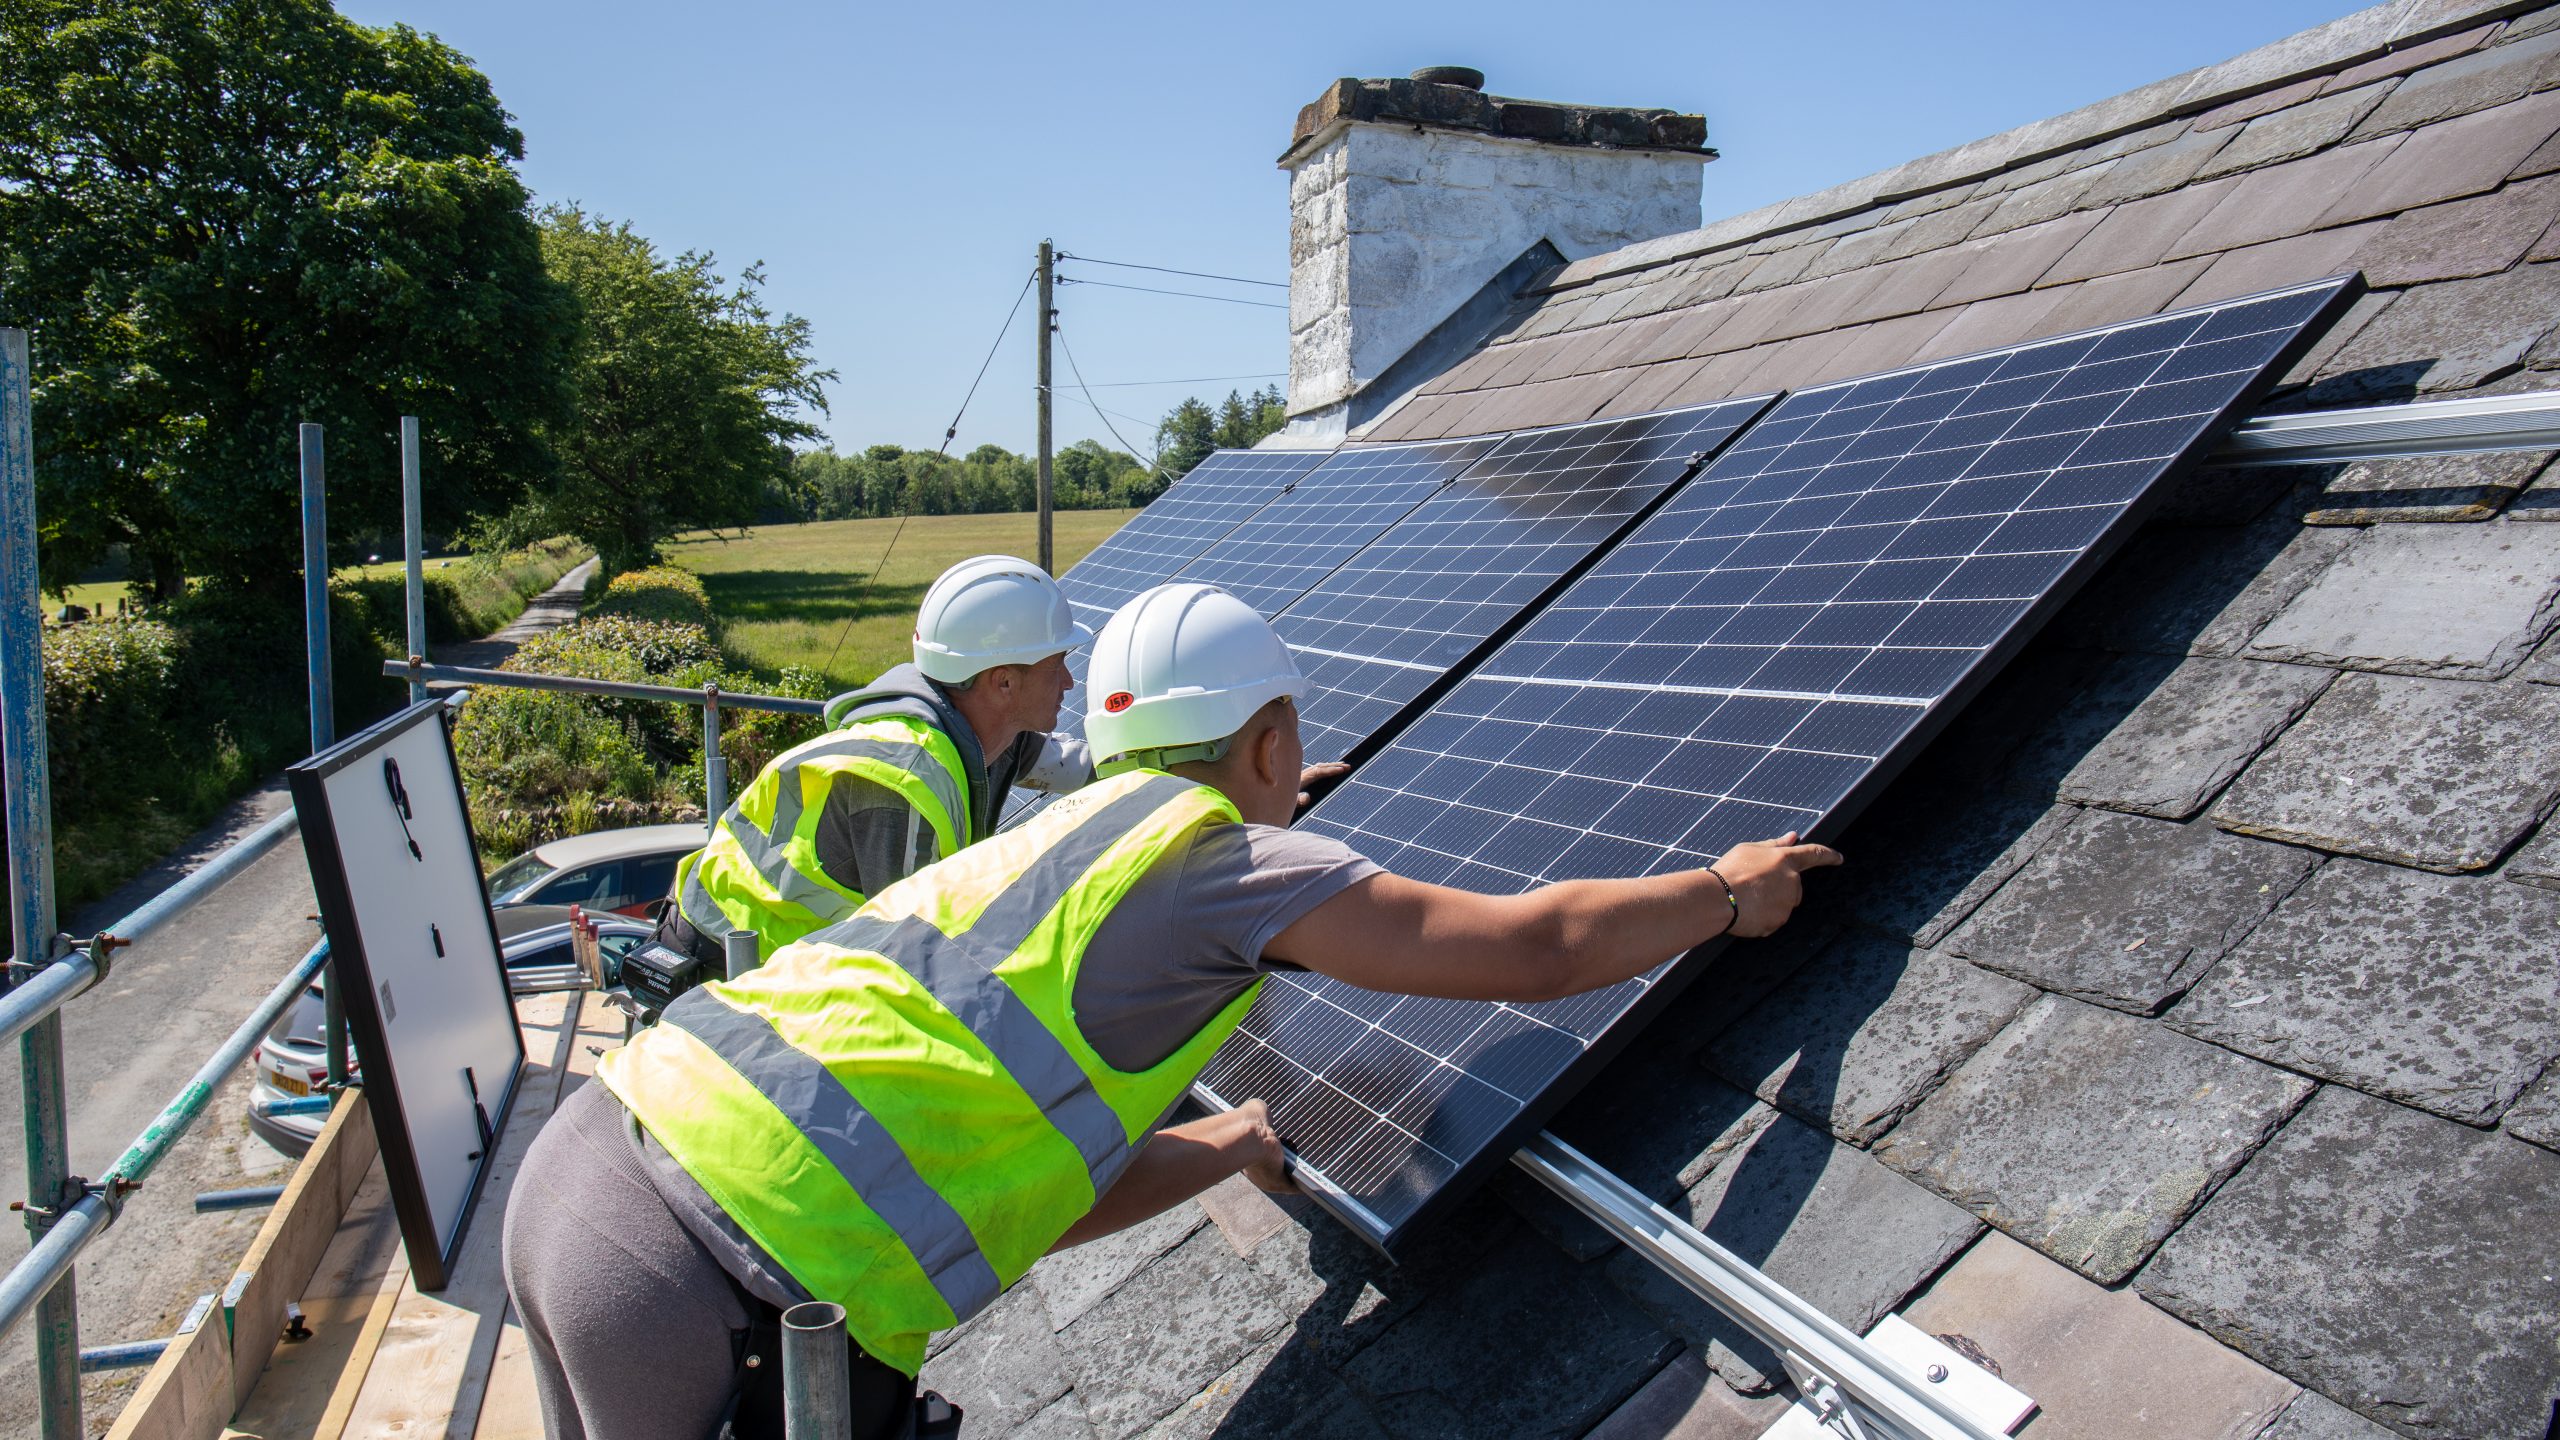 Two workers in high-vis vests and helmets fitting solar panels on the roof of a house.